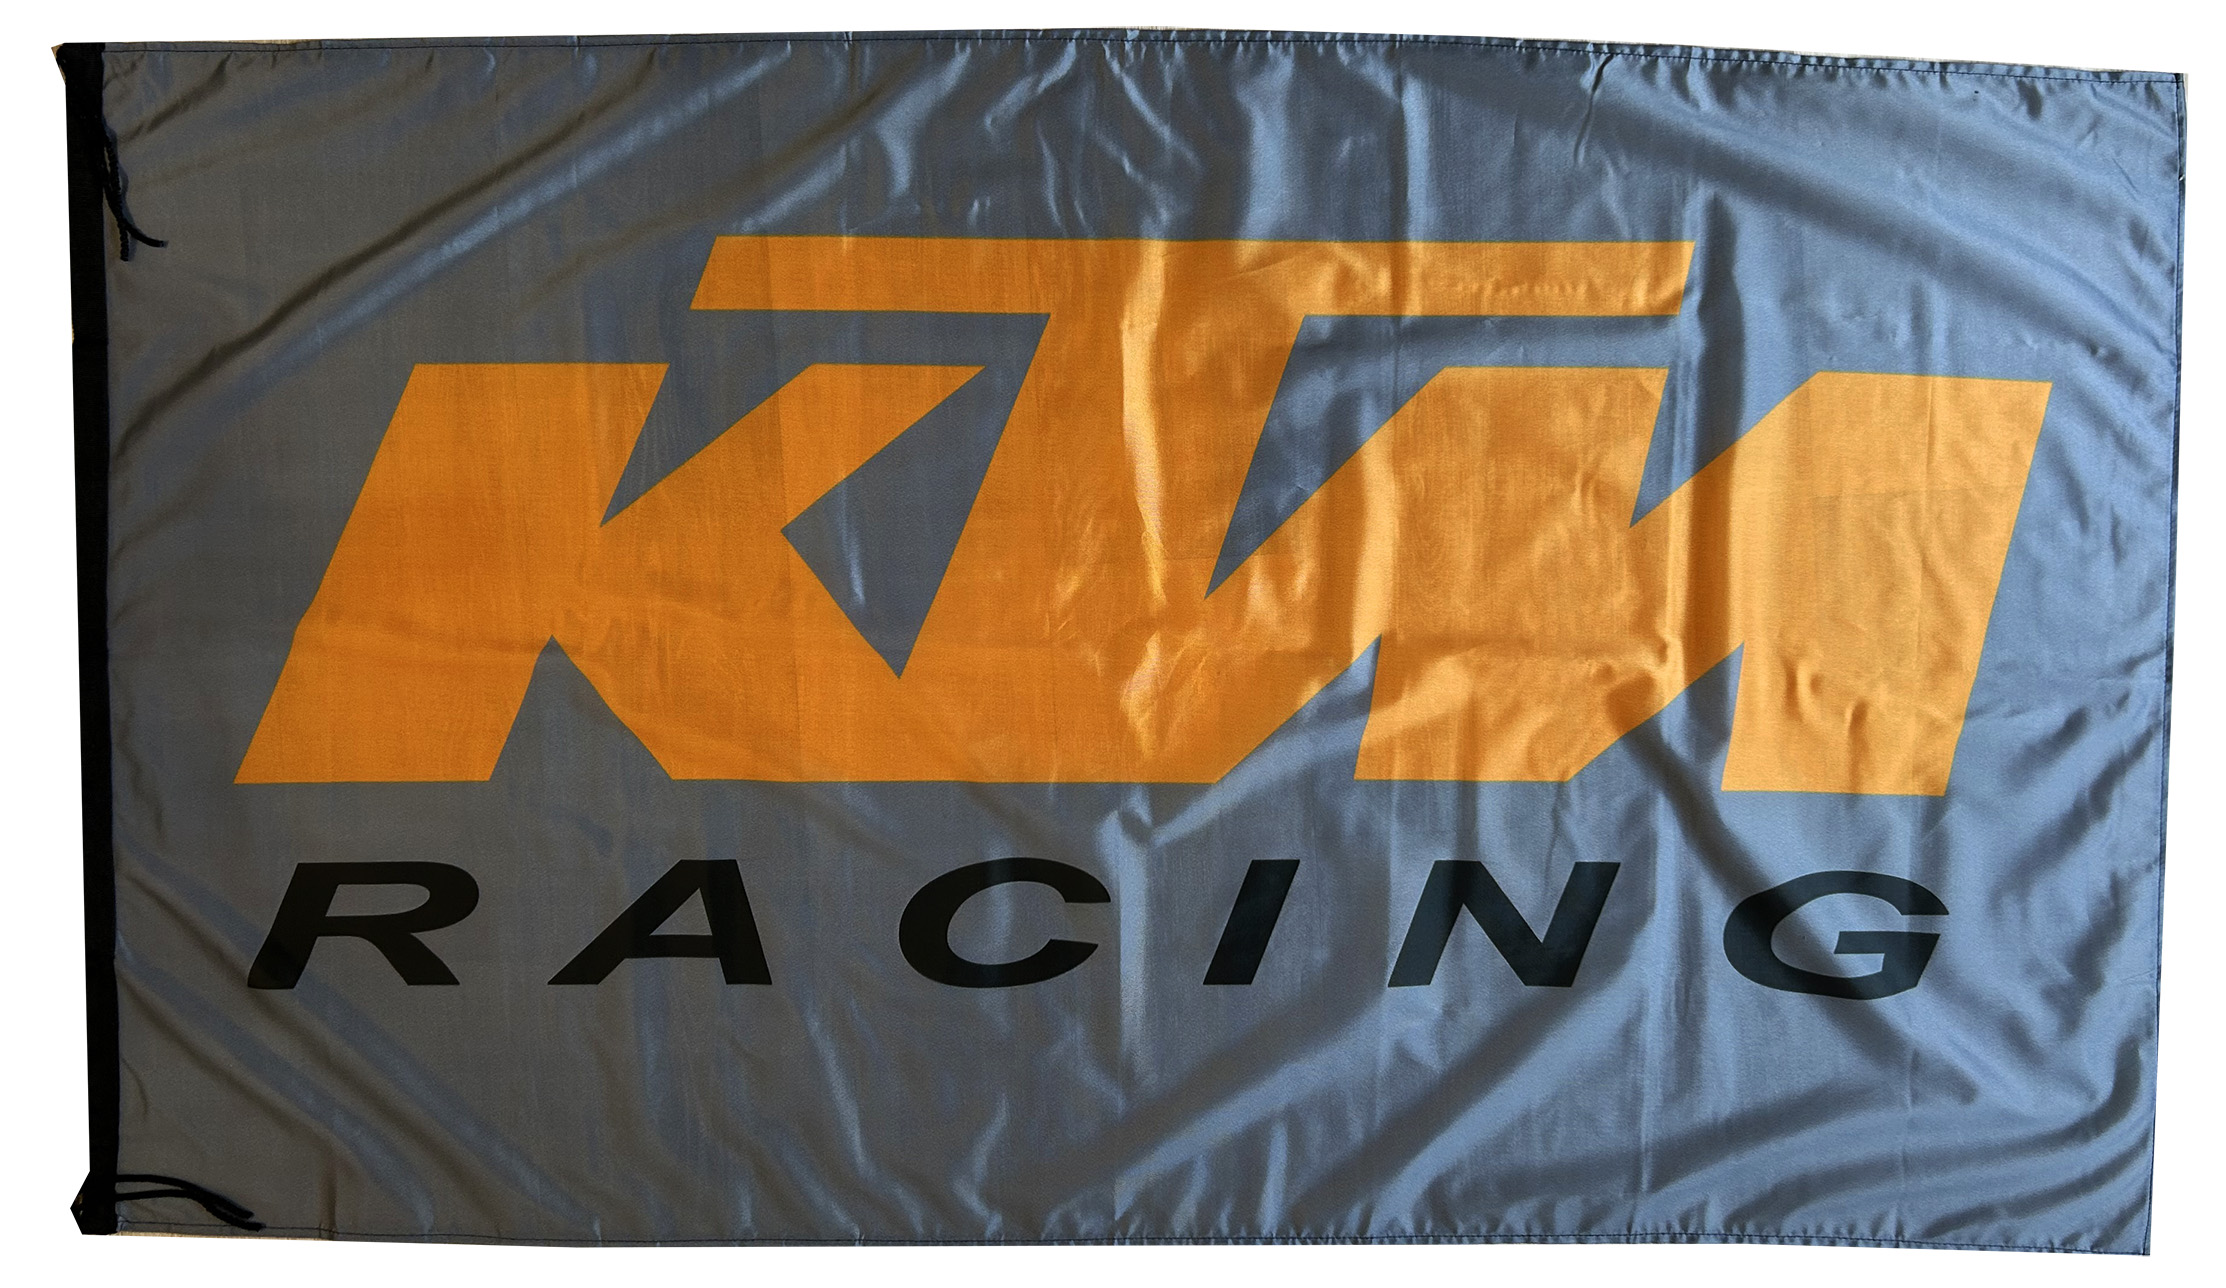 Flag  Subaru Rally Team Vertical Yellow Flag / Banner 5 X 3 Ft (150 x 90 cm) Automotive Flags and Banners